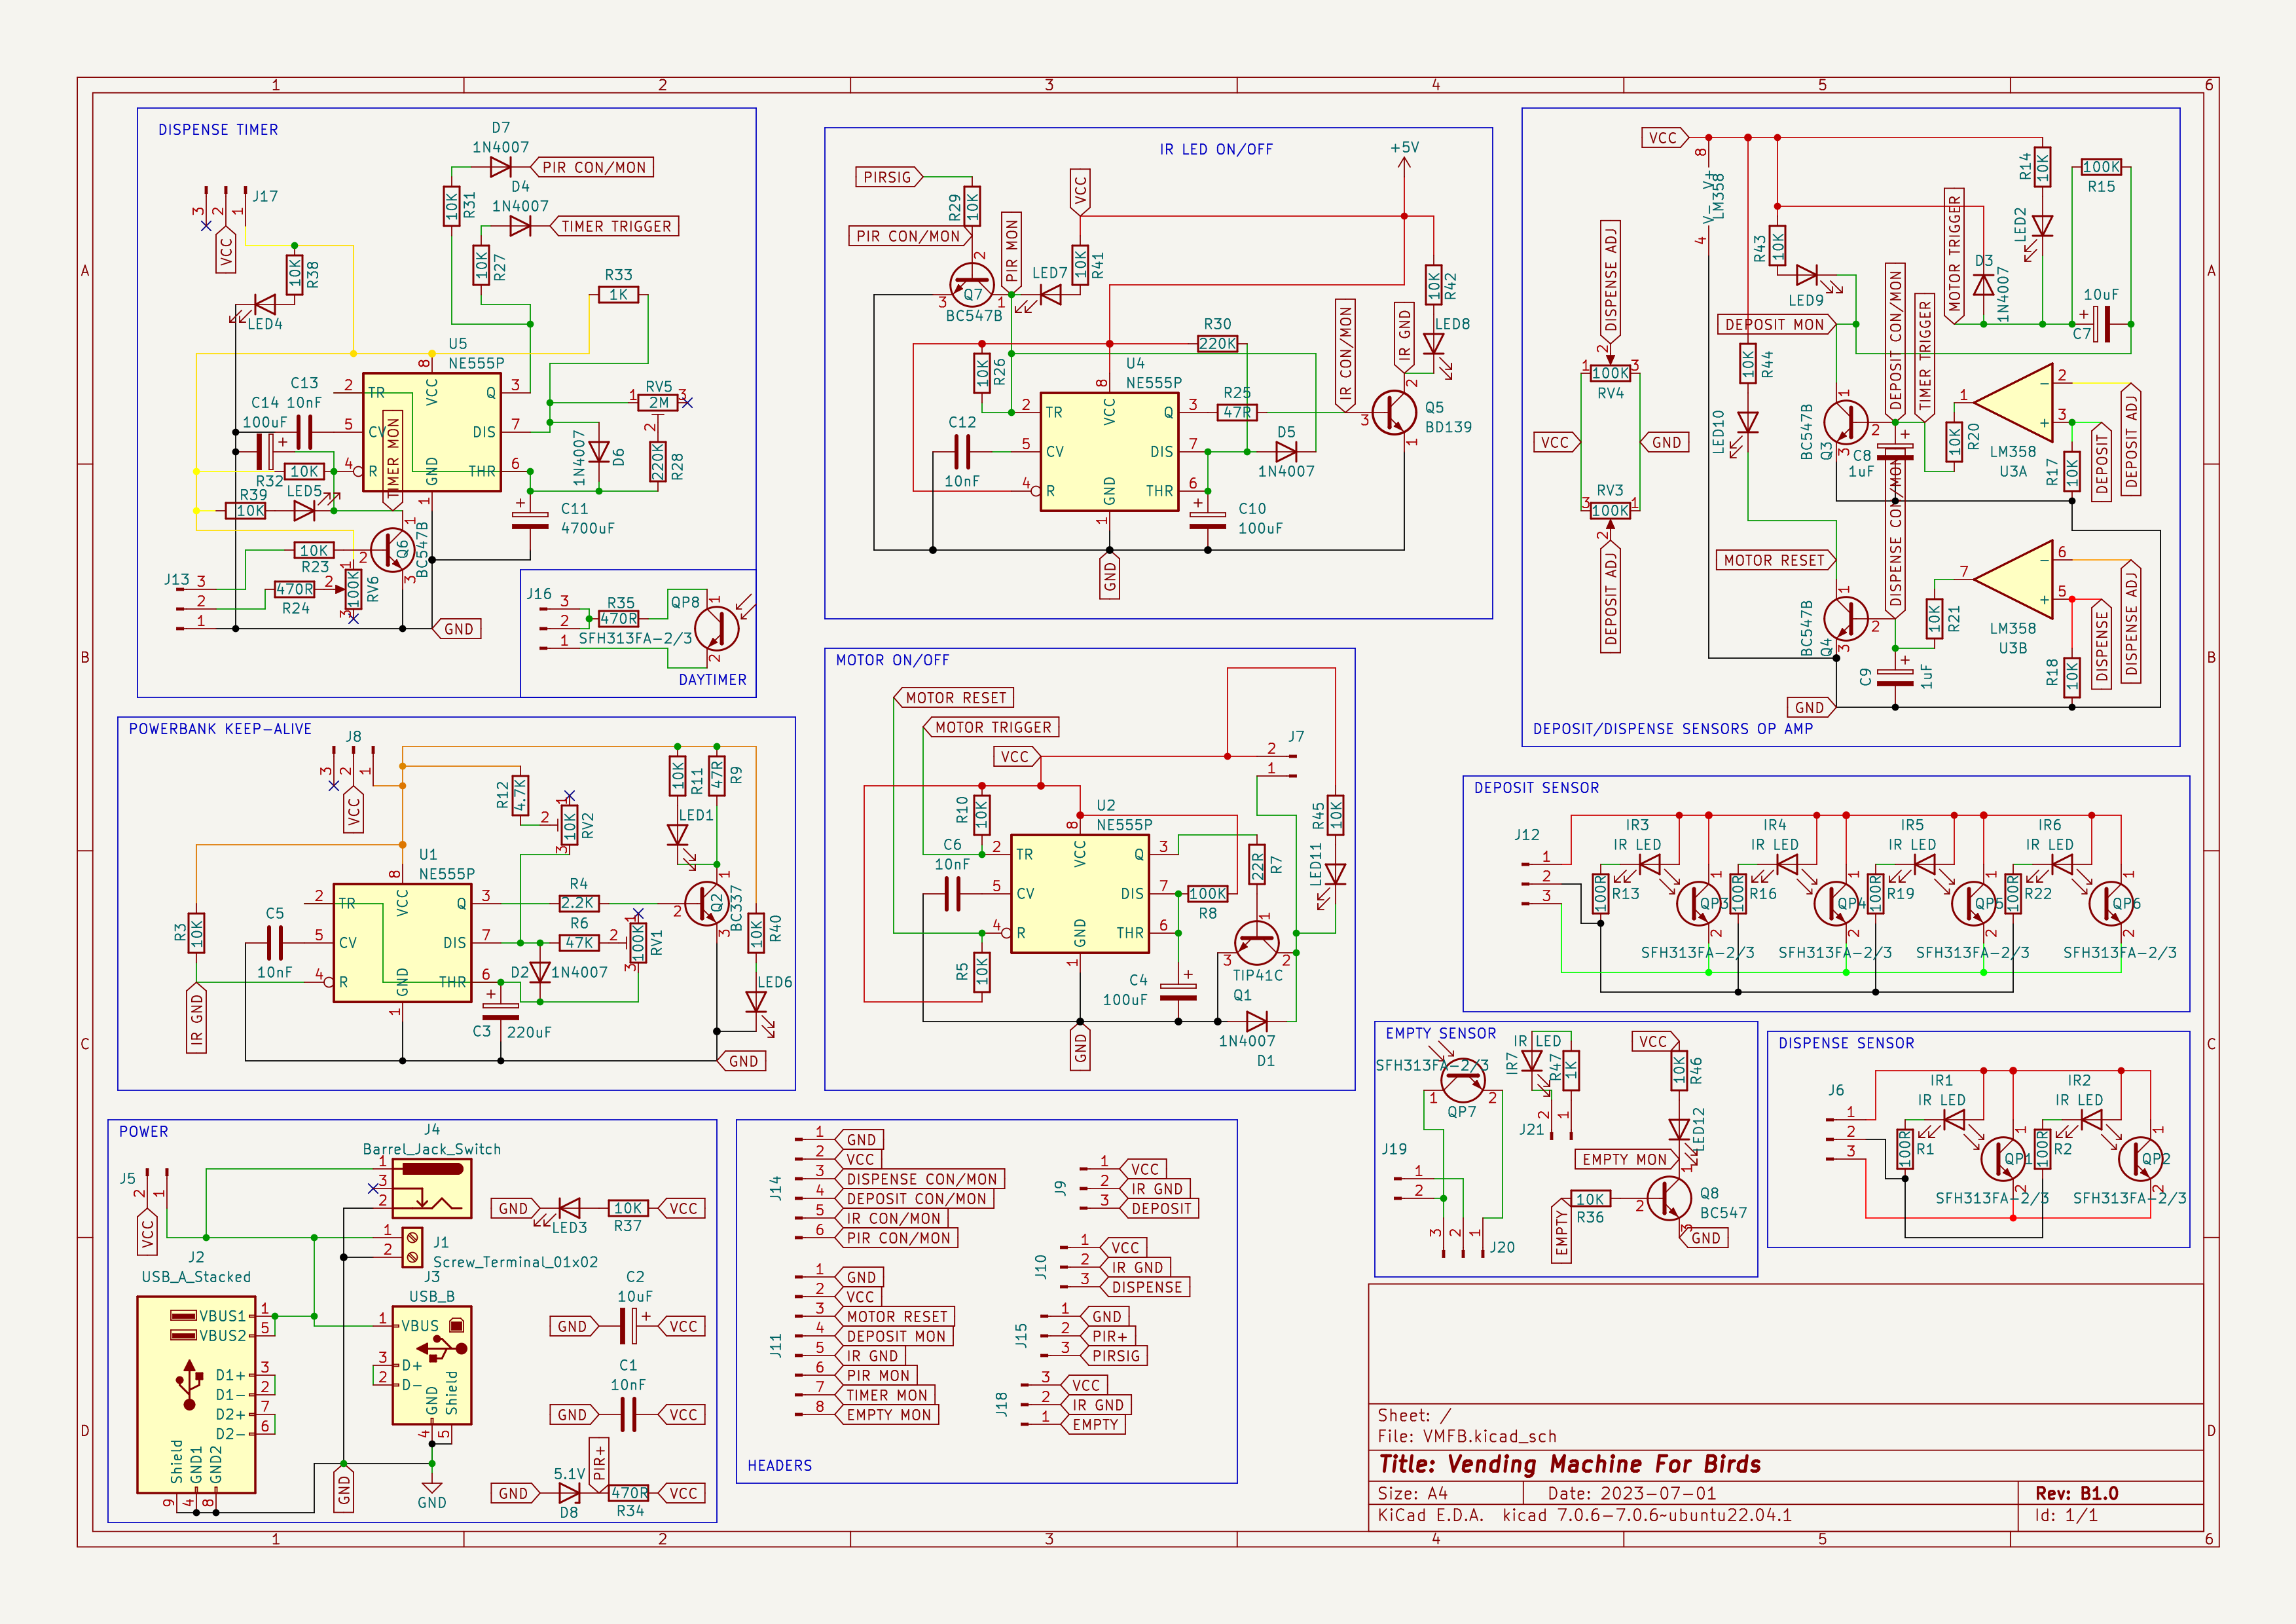 VMFB_schematic_RBV1.0.png